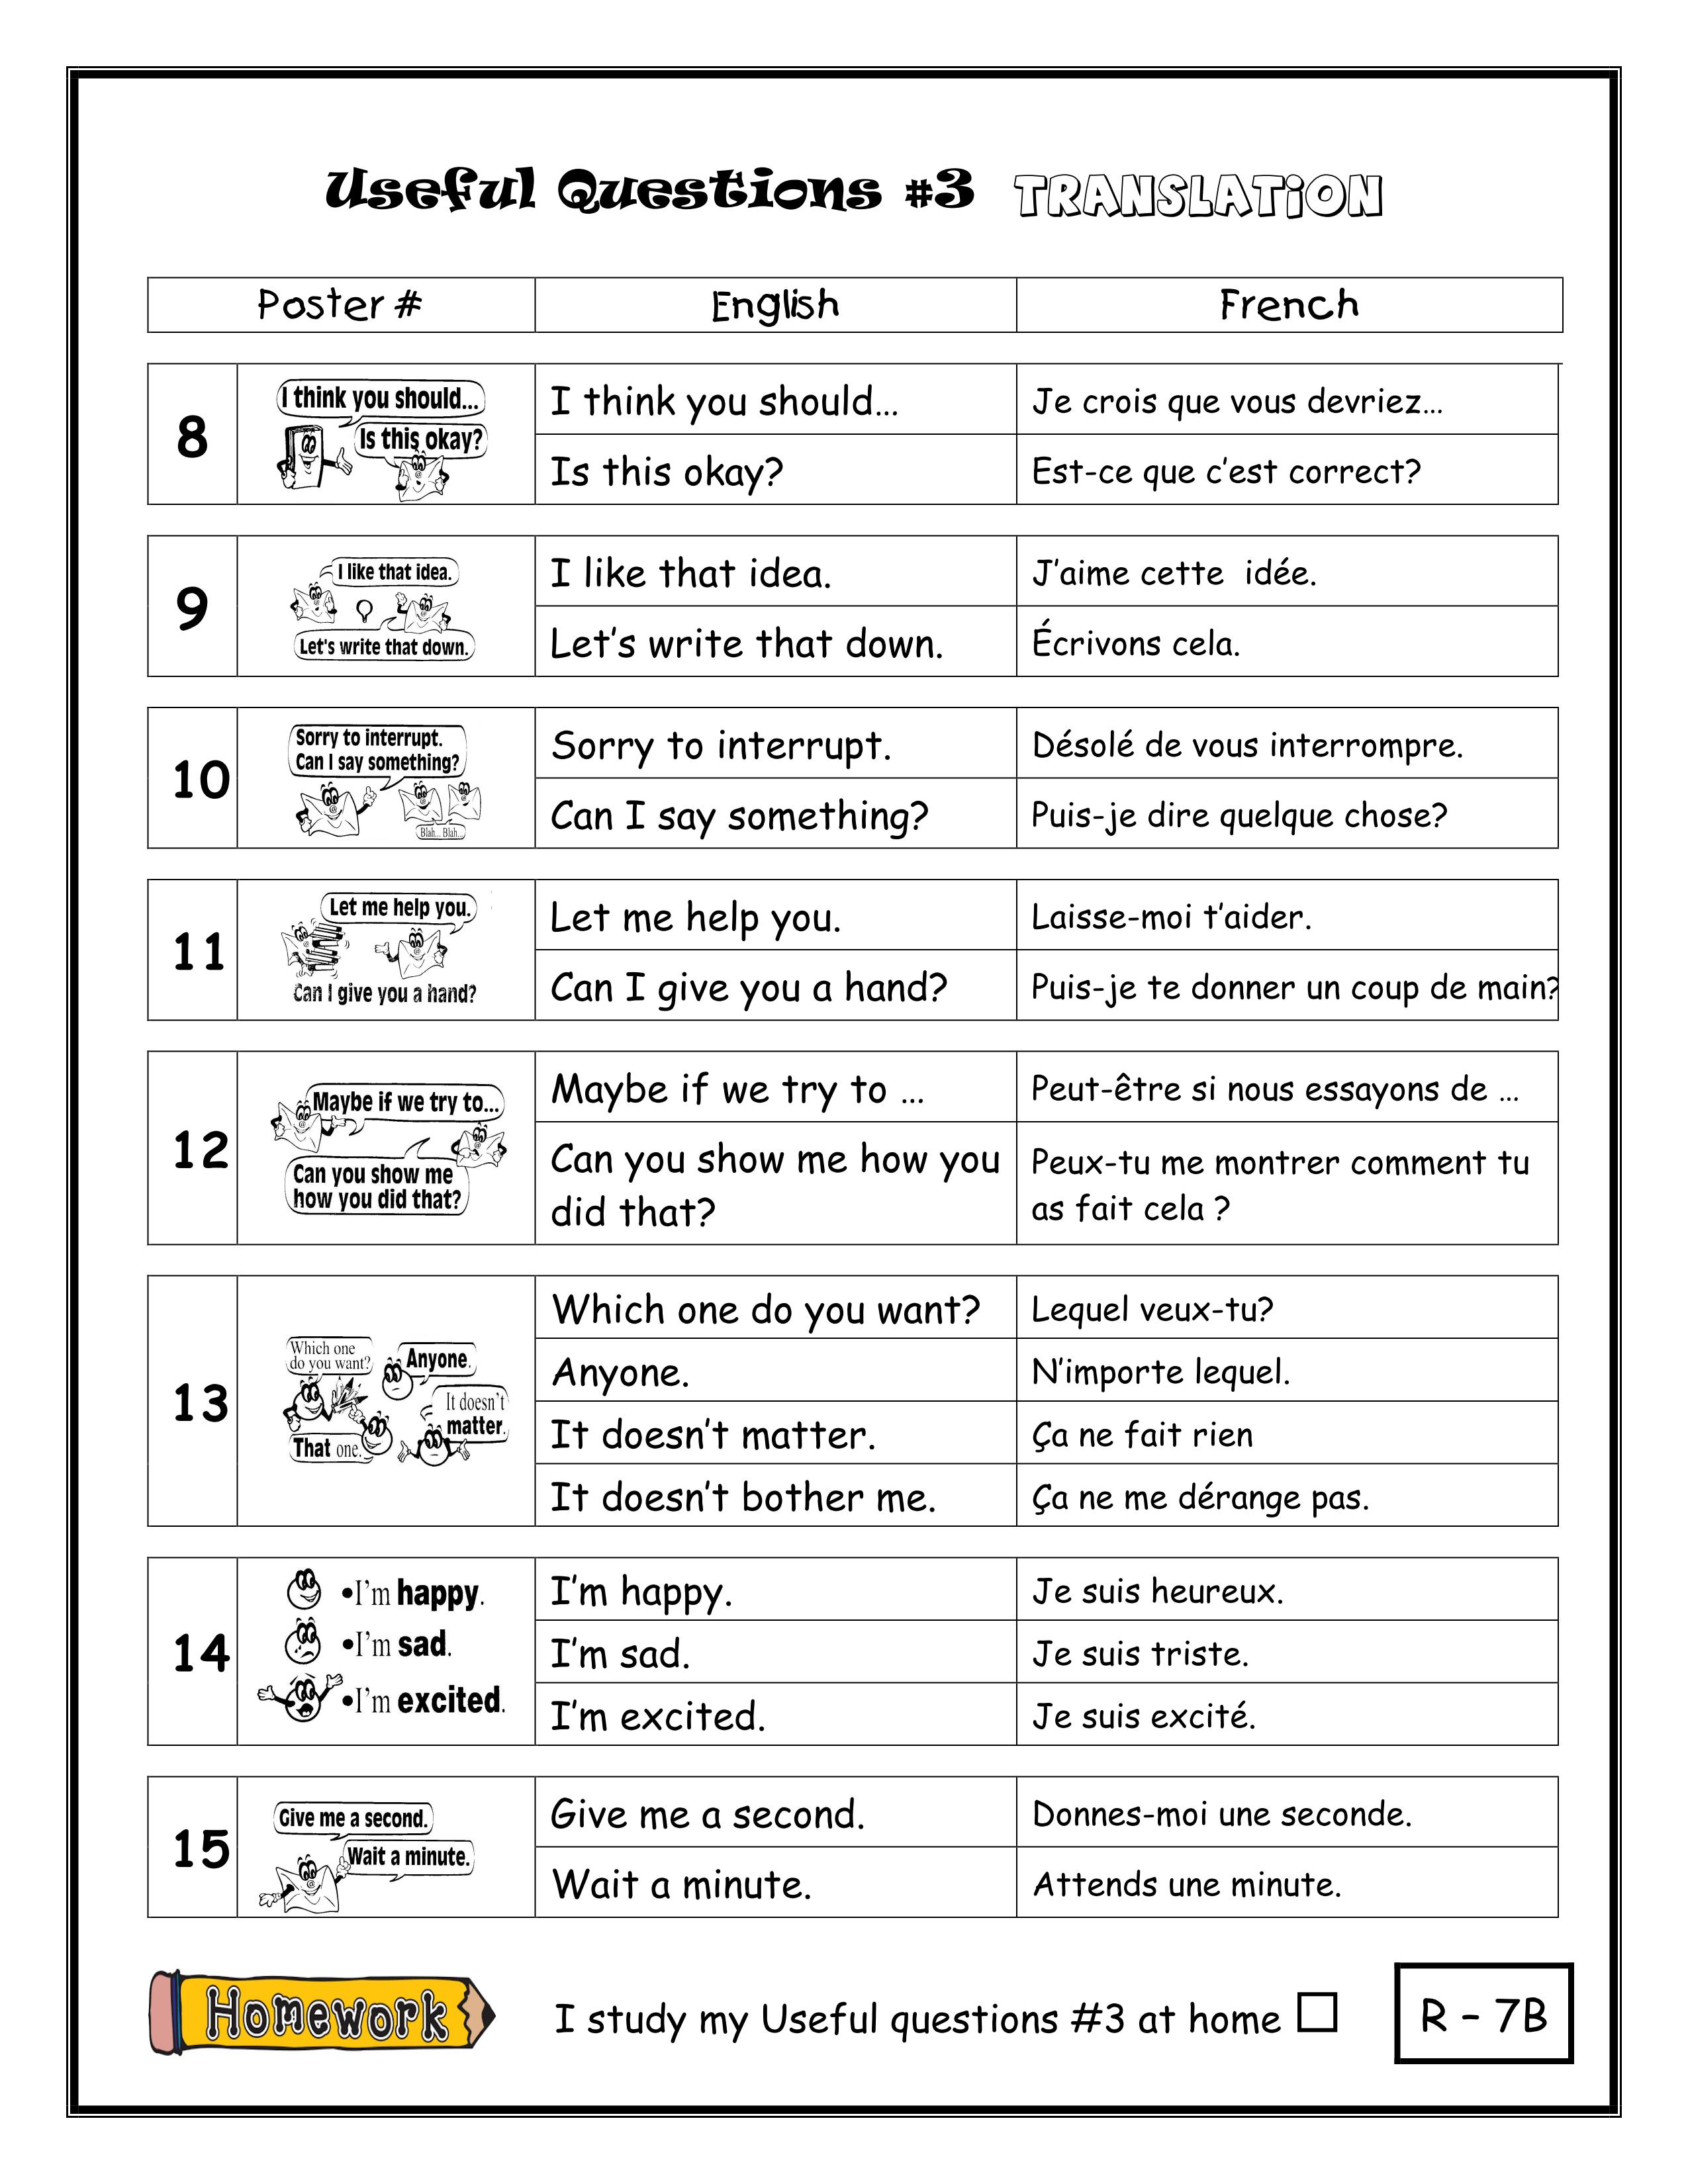 Useful questions - Miss English